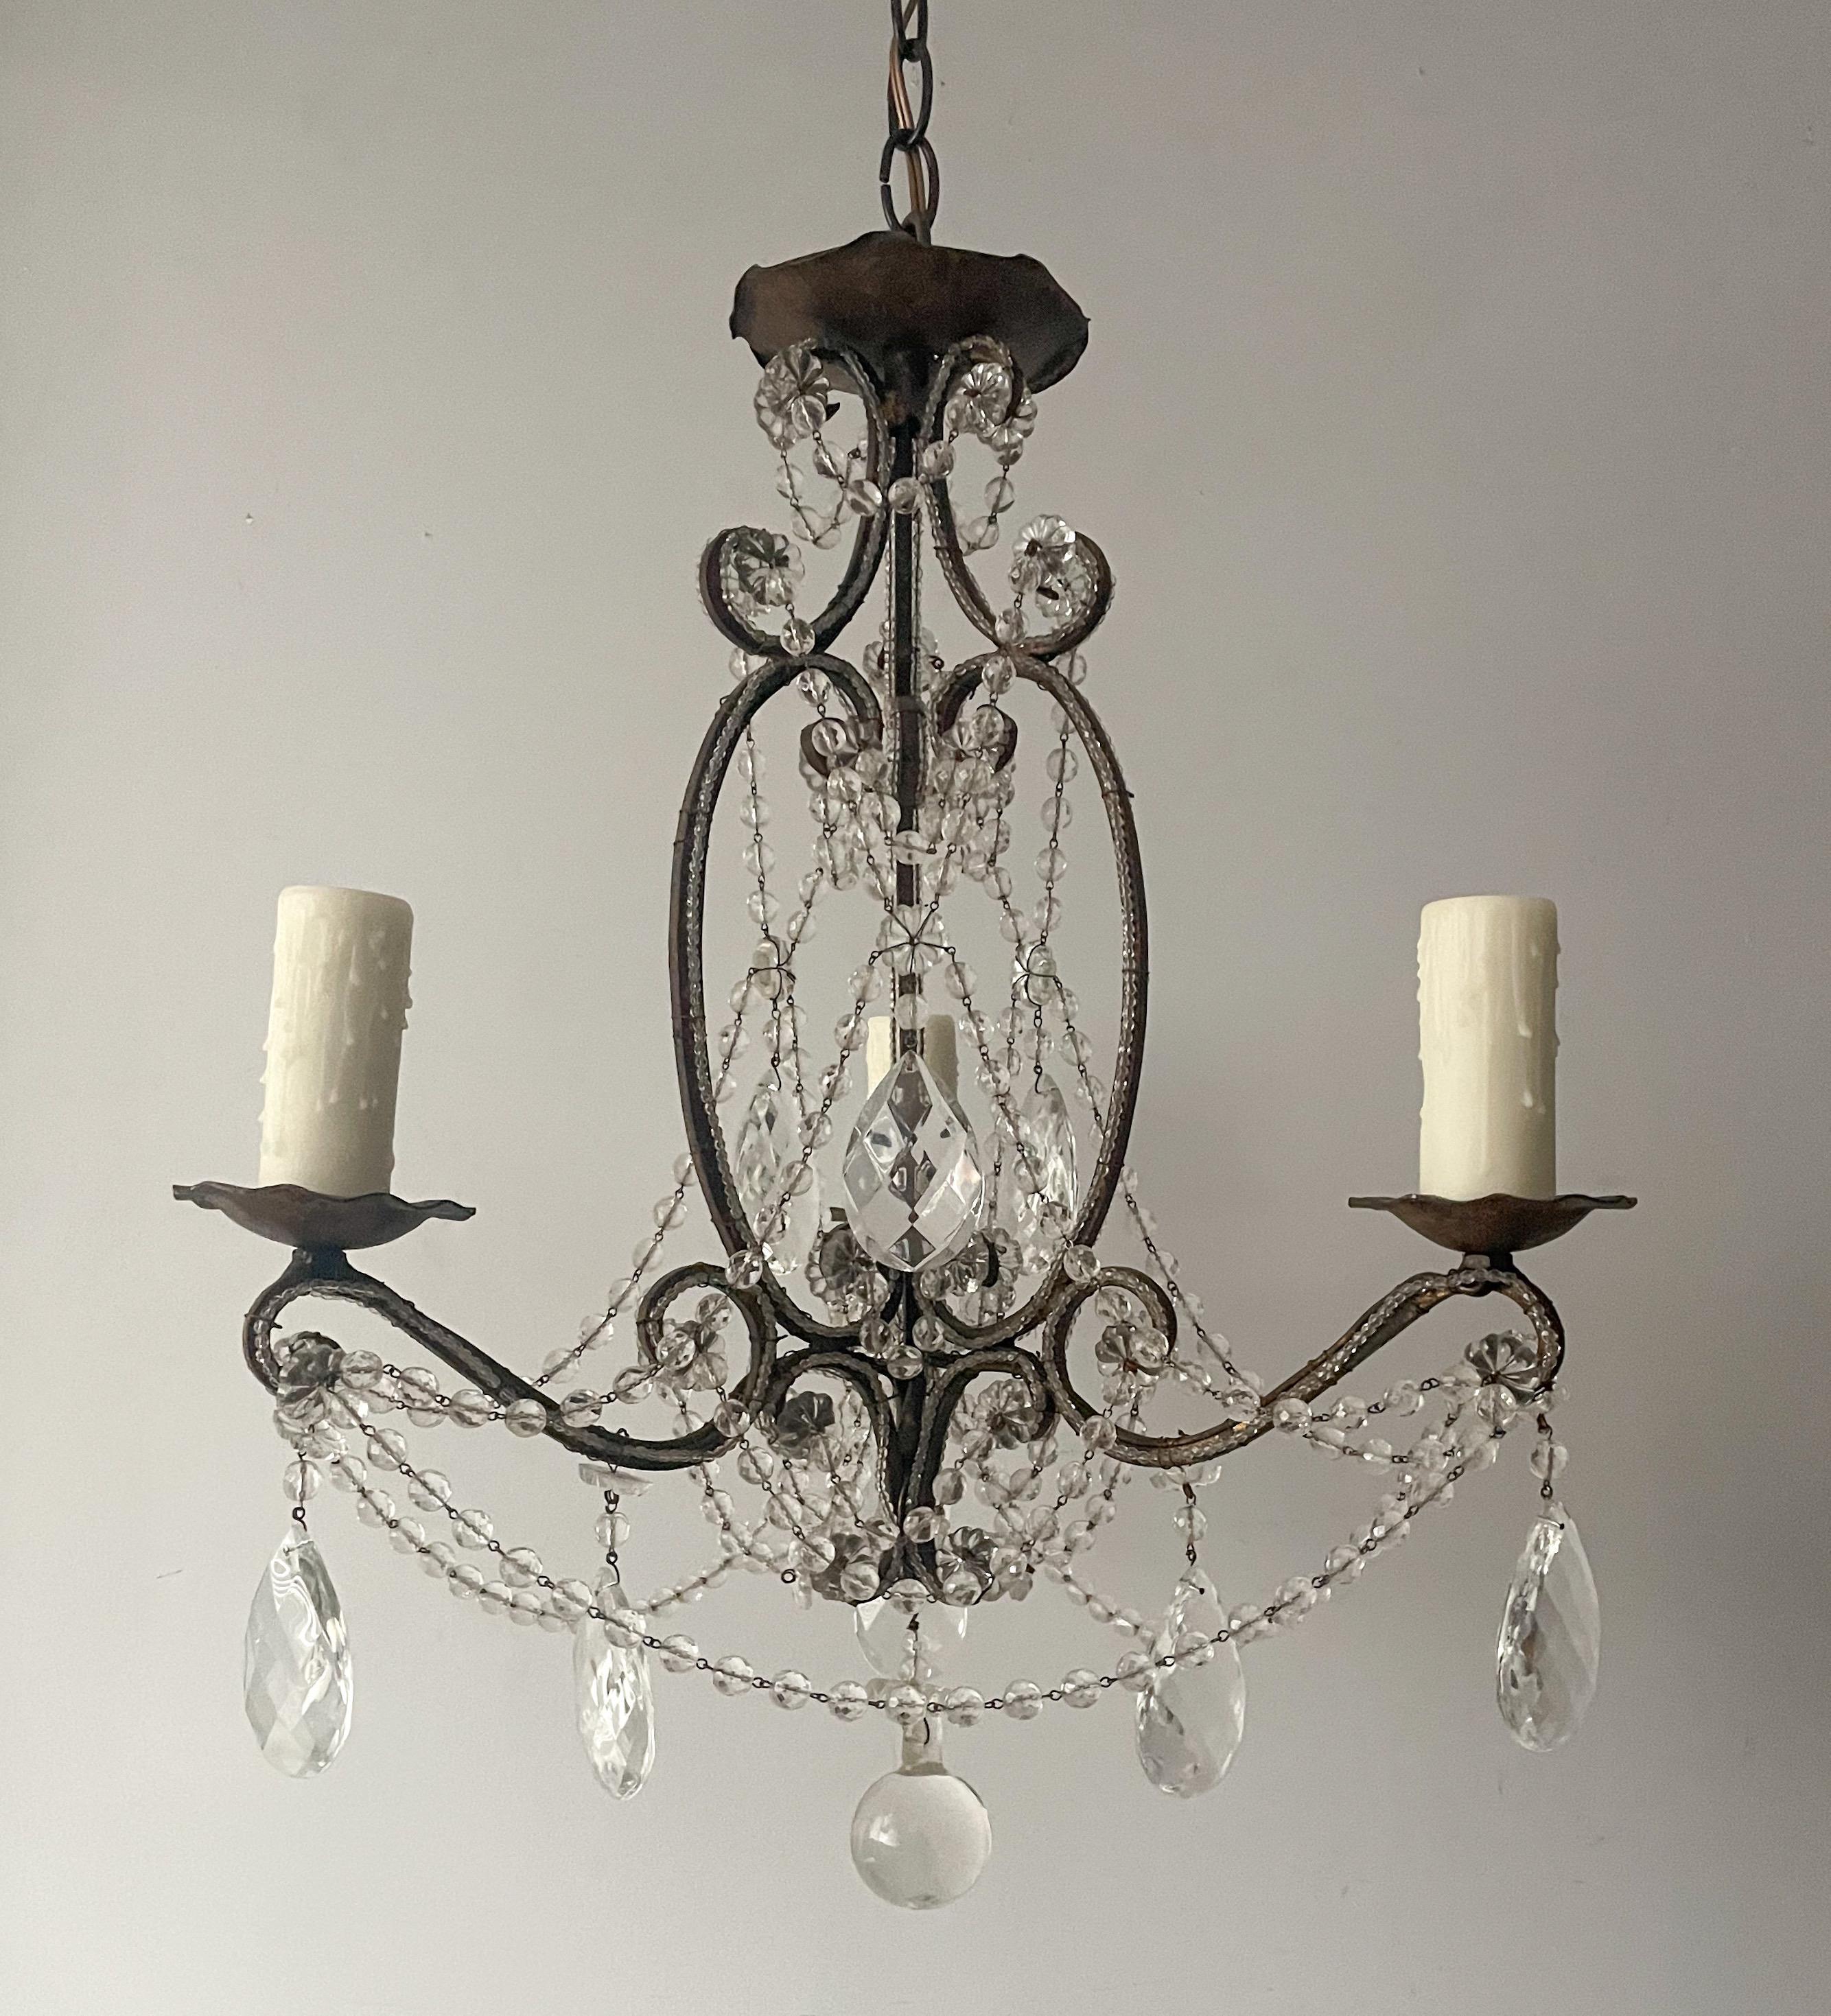 Beautiful, small scale Italian gilt-iron and crystal beaded chandelier. 

The chandelier features a scrolled iron frame in a dark bronze paint finish and crystal decorations. 

The chandelier is wired and in working condition, it requires 3